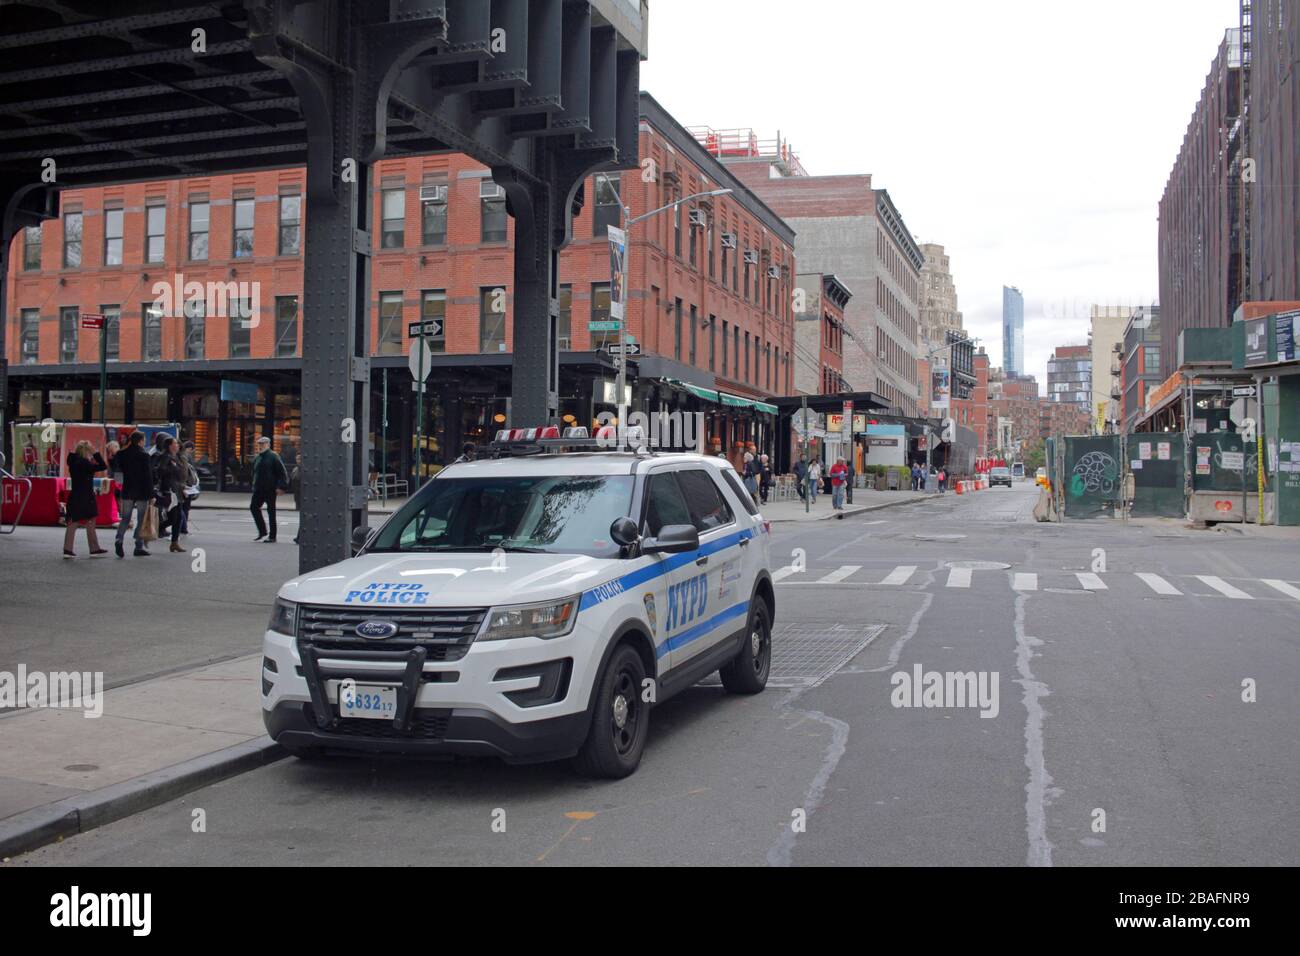 NYPD vehicle under the High Line, Meatpacking District, New York City, USA Stock Photo